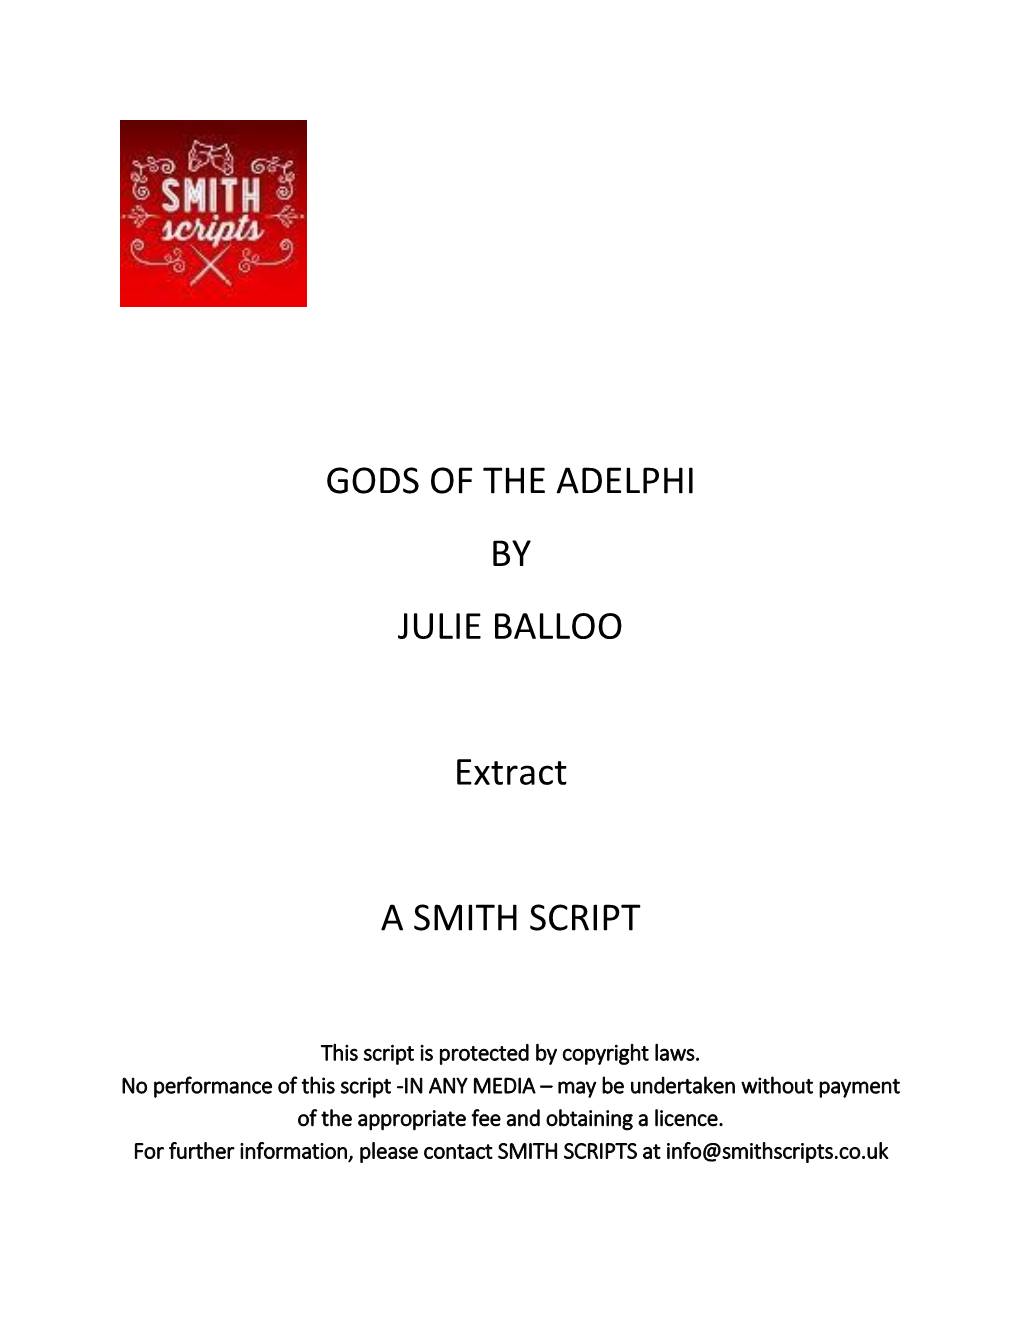 GODS of the ADELPHI by JULIE BALLOO Extract